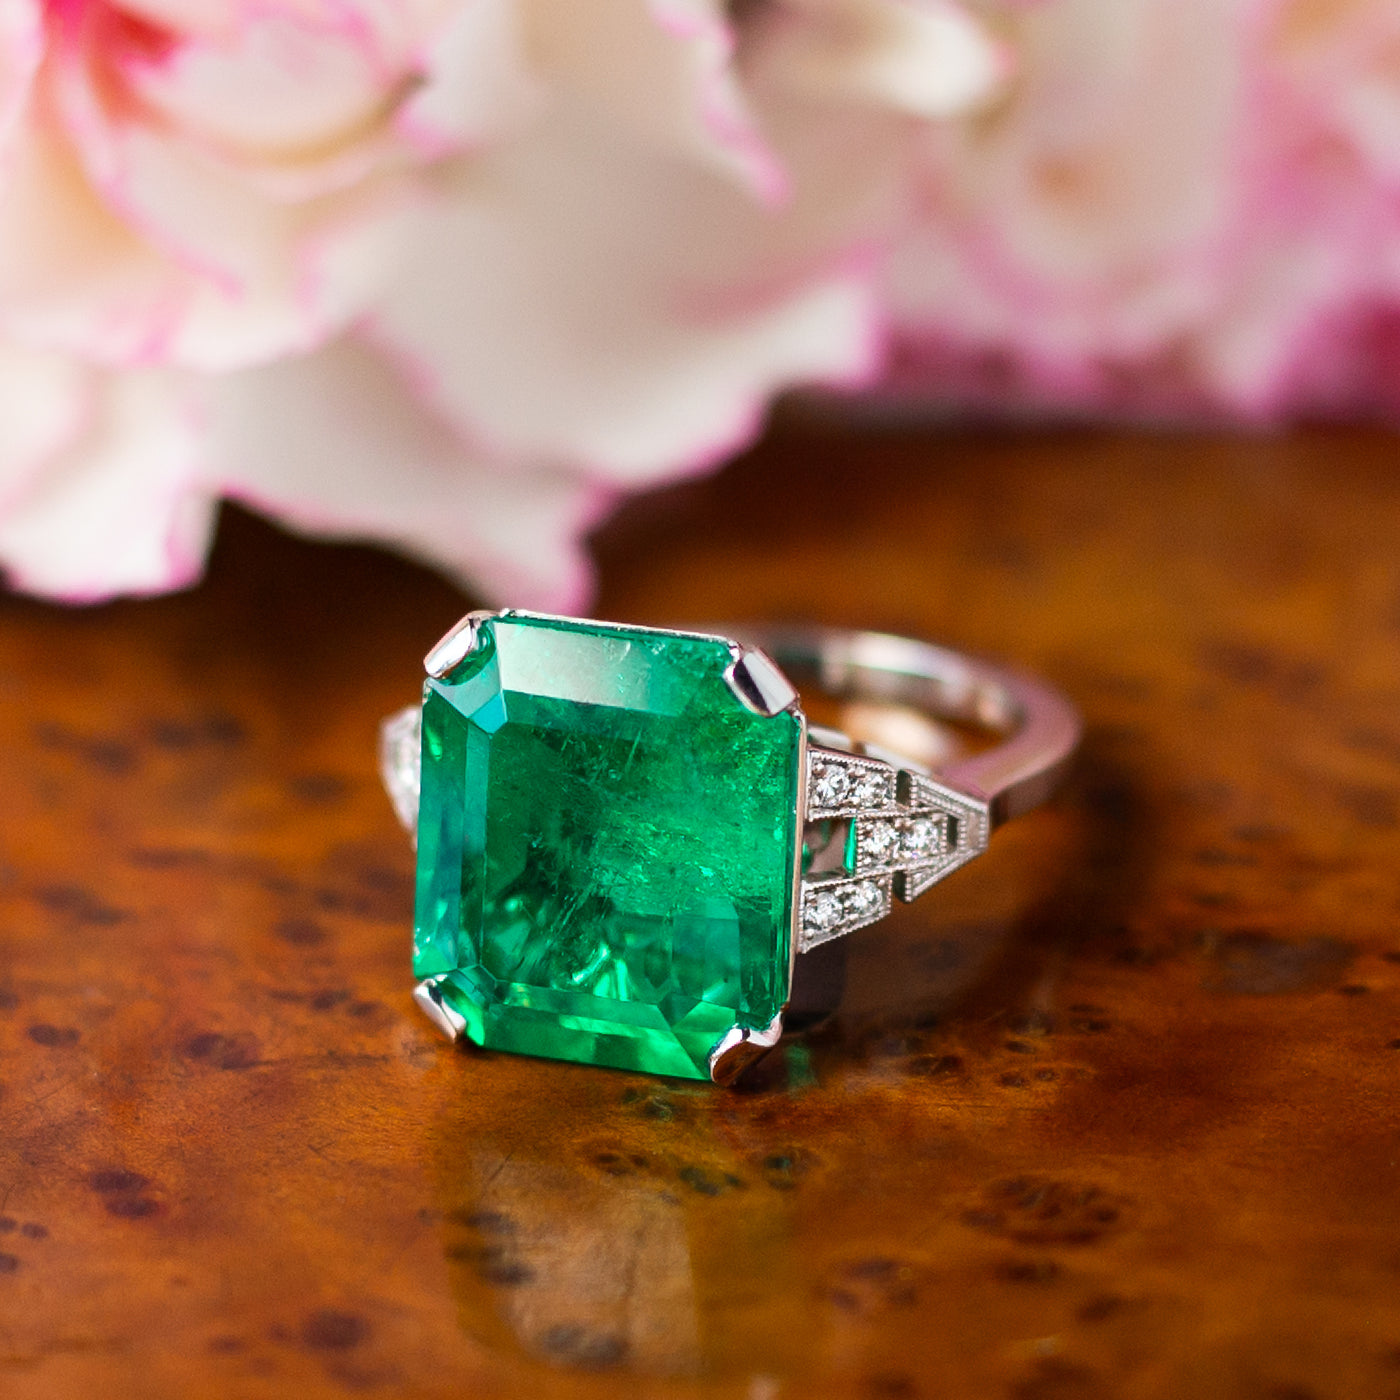 Ready to Quiz Your Colored Gemstone Knowledge?